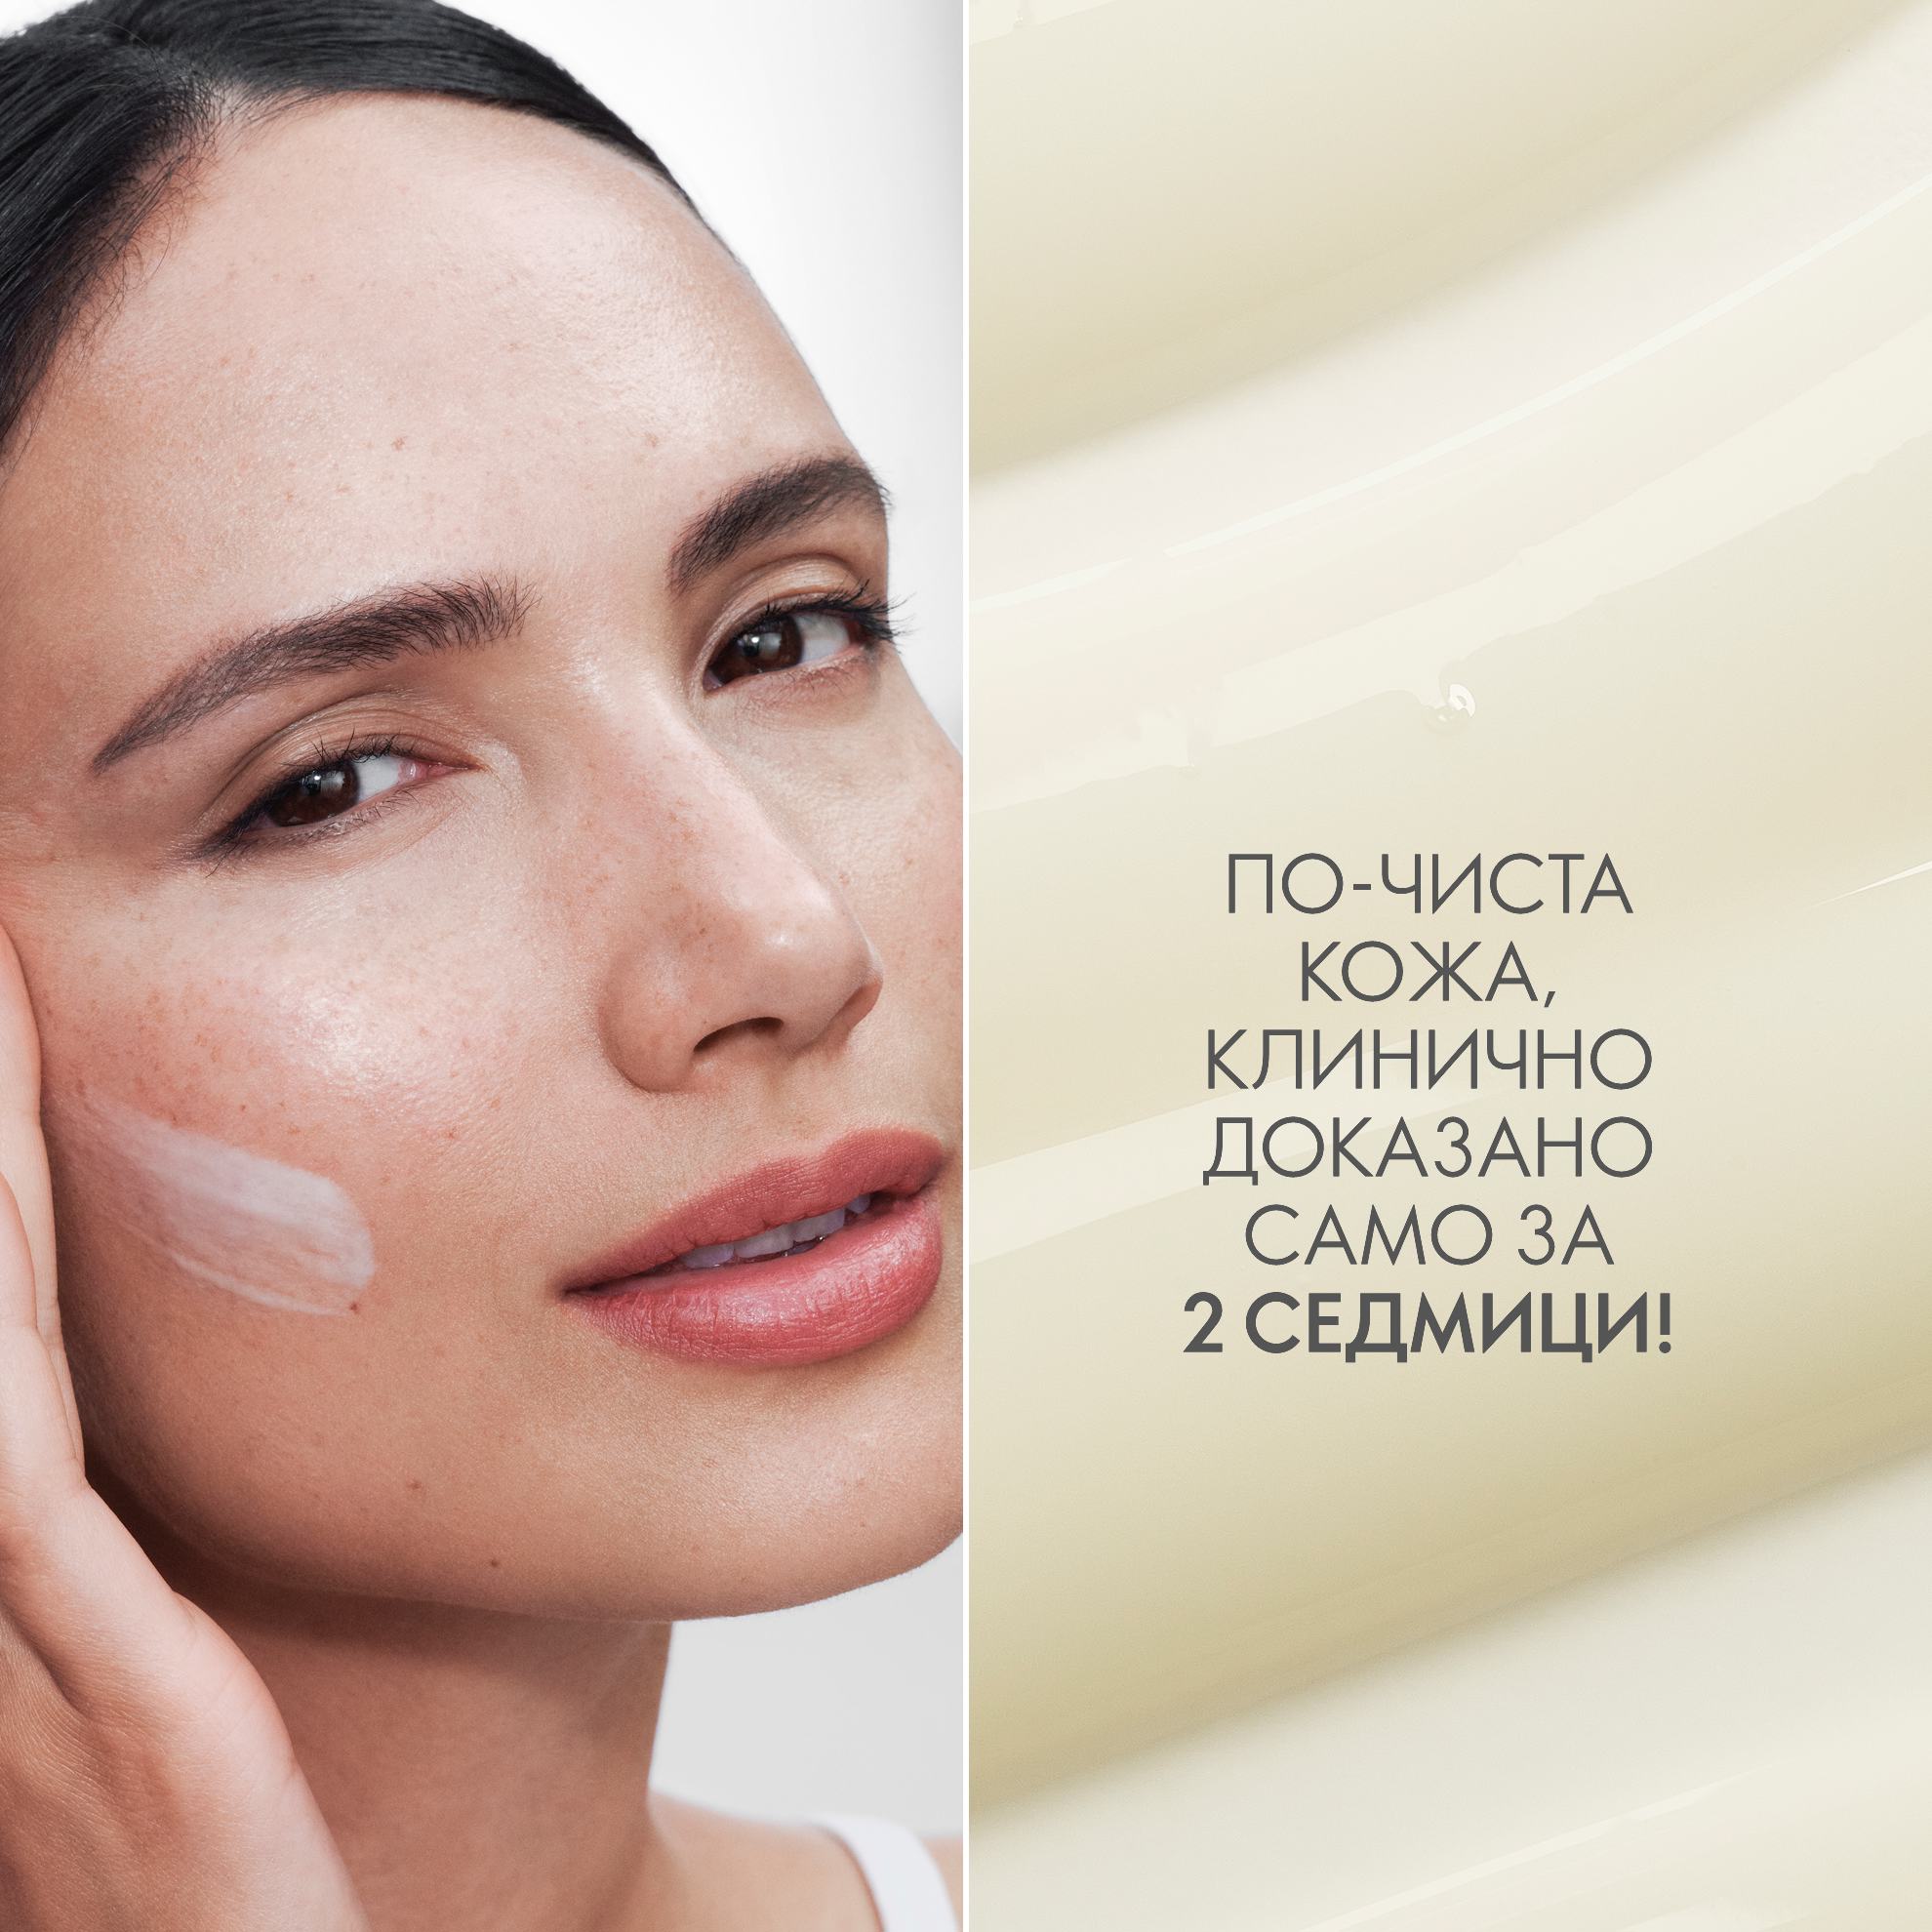 https://media-cdn.oriflame.com/productImage?externalMediaId=product-management-media%2fProducts%2f45608%2fBG%2f45608_2.png&id=17573083&version=1